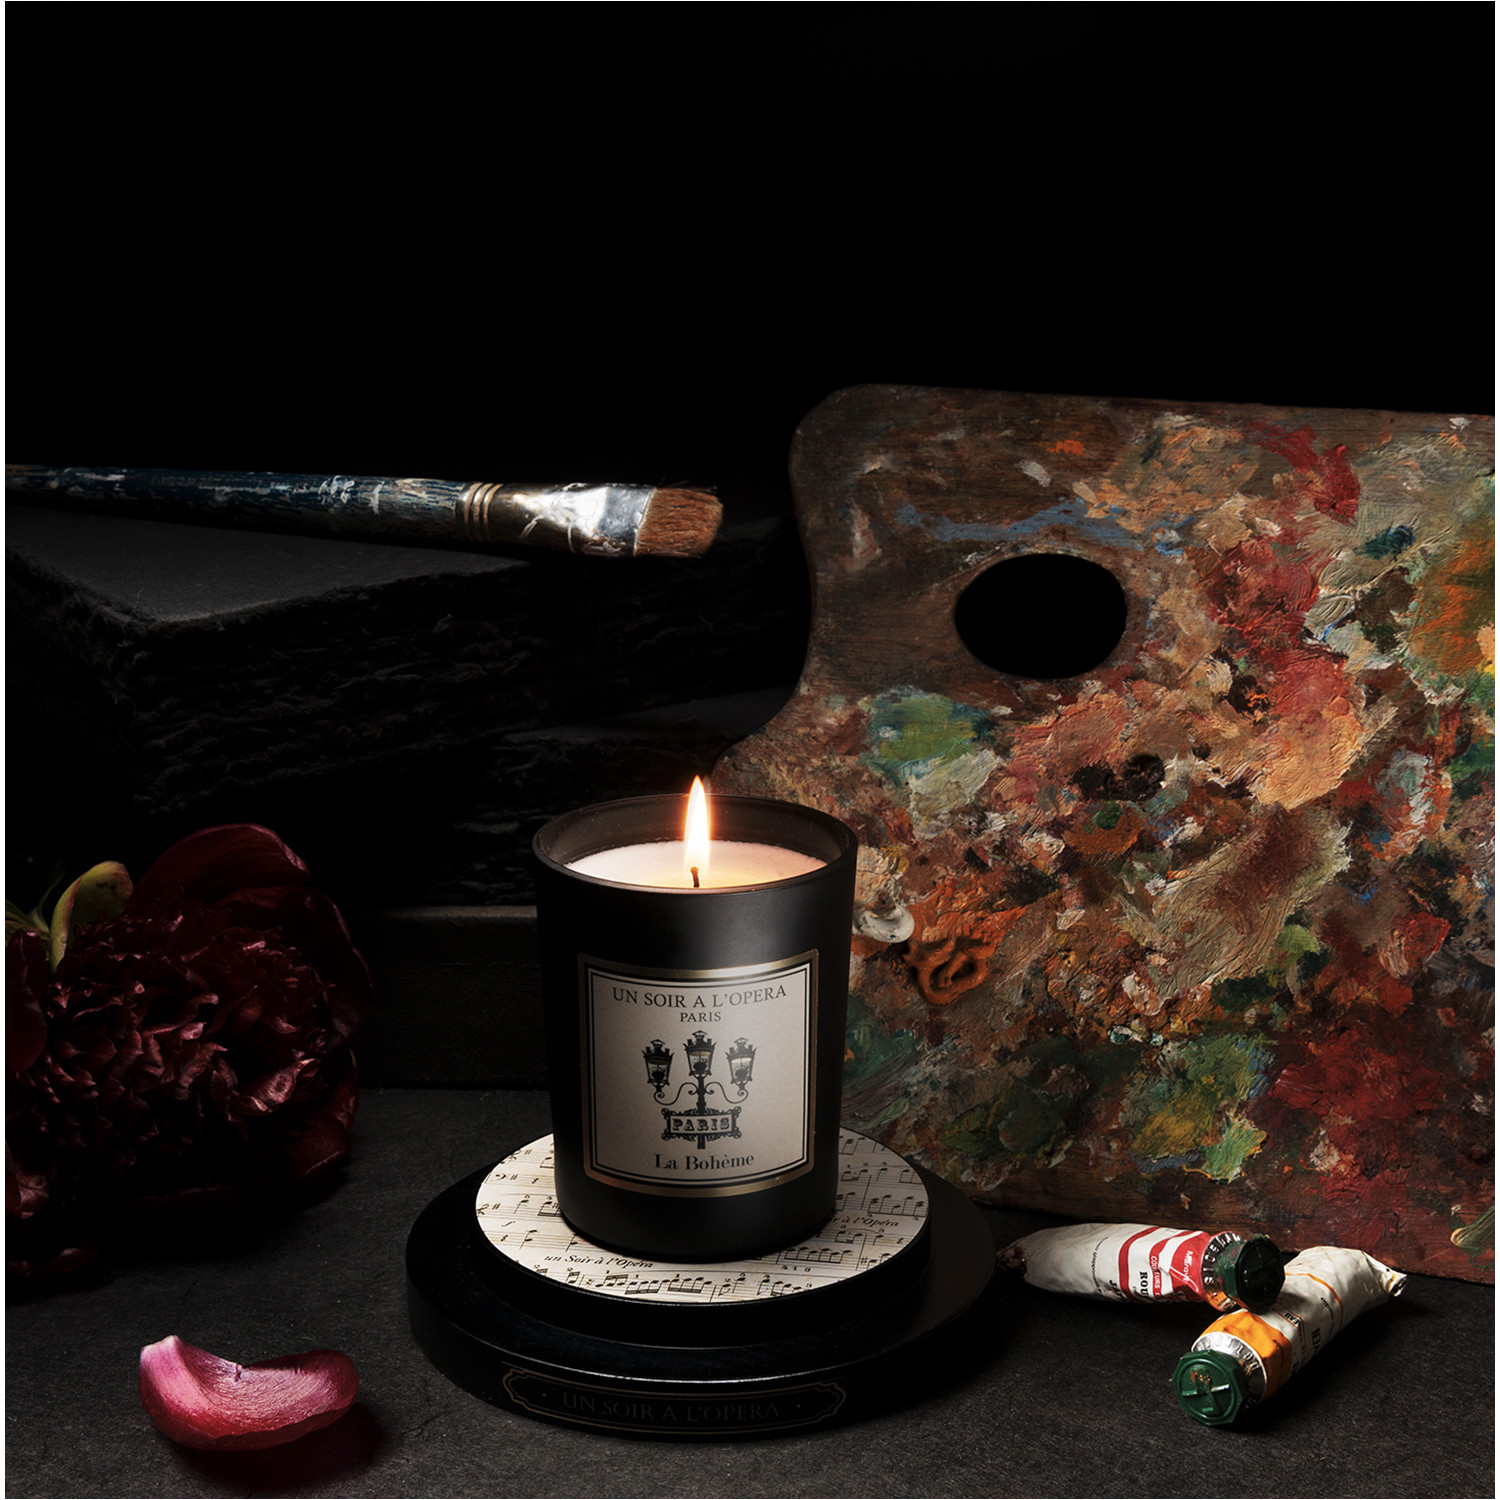 THE NUTCRACKER - Scented candle - Spruce and Gingerbread - 6 units minimum